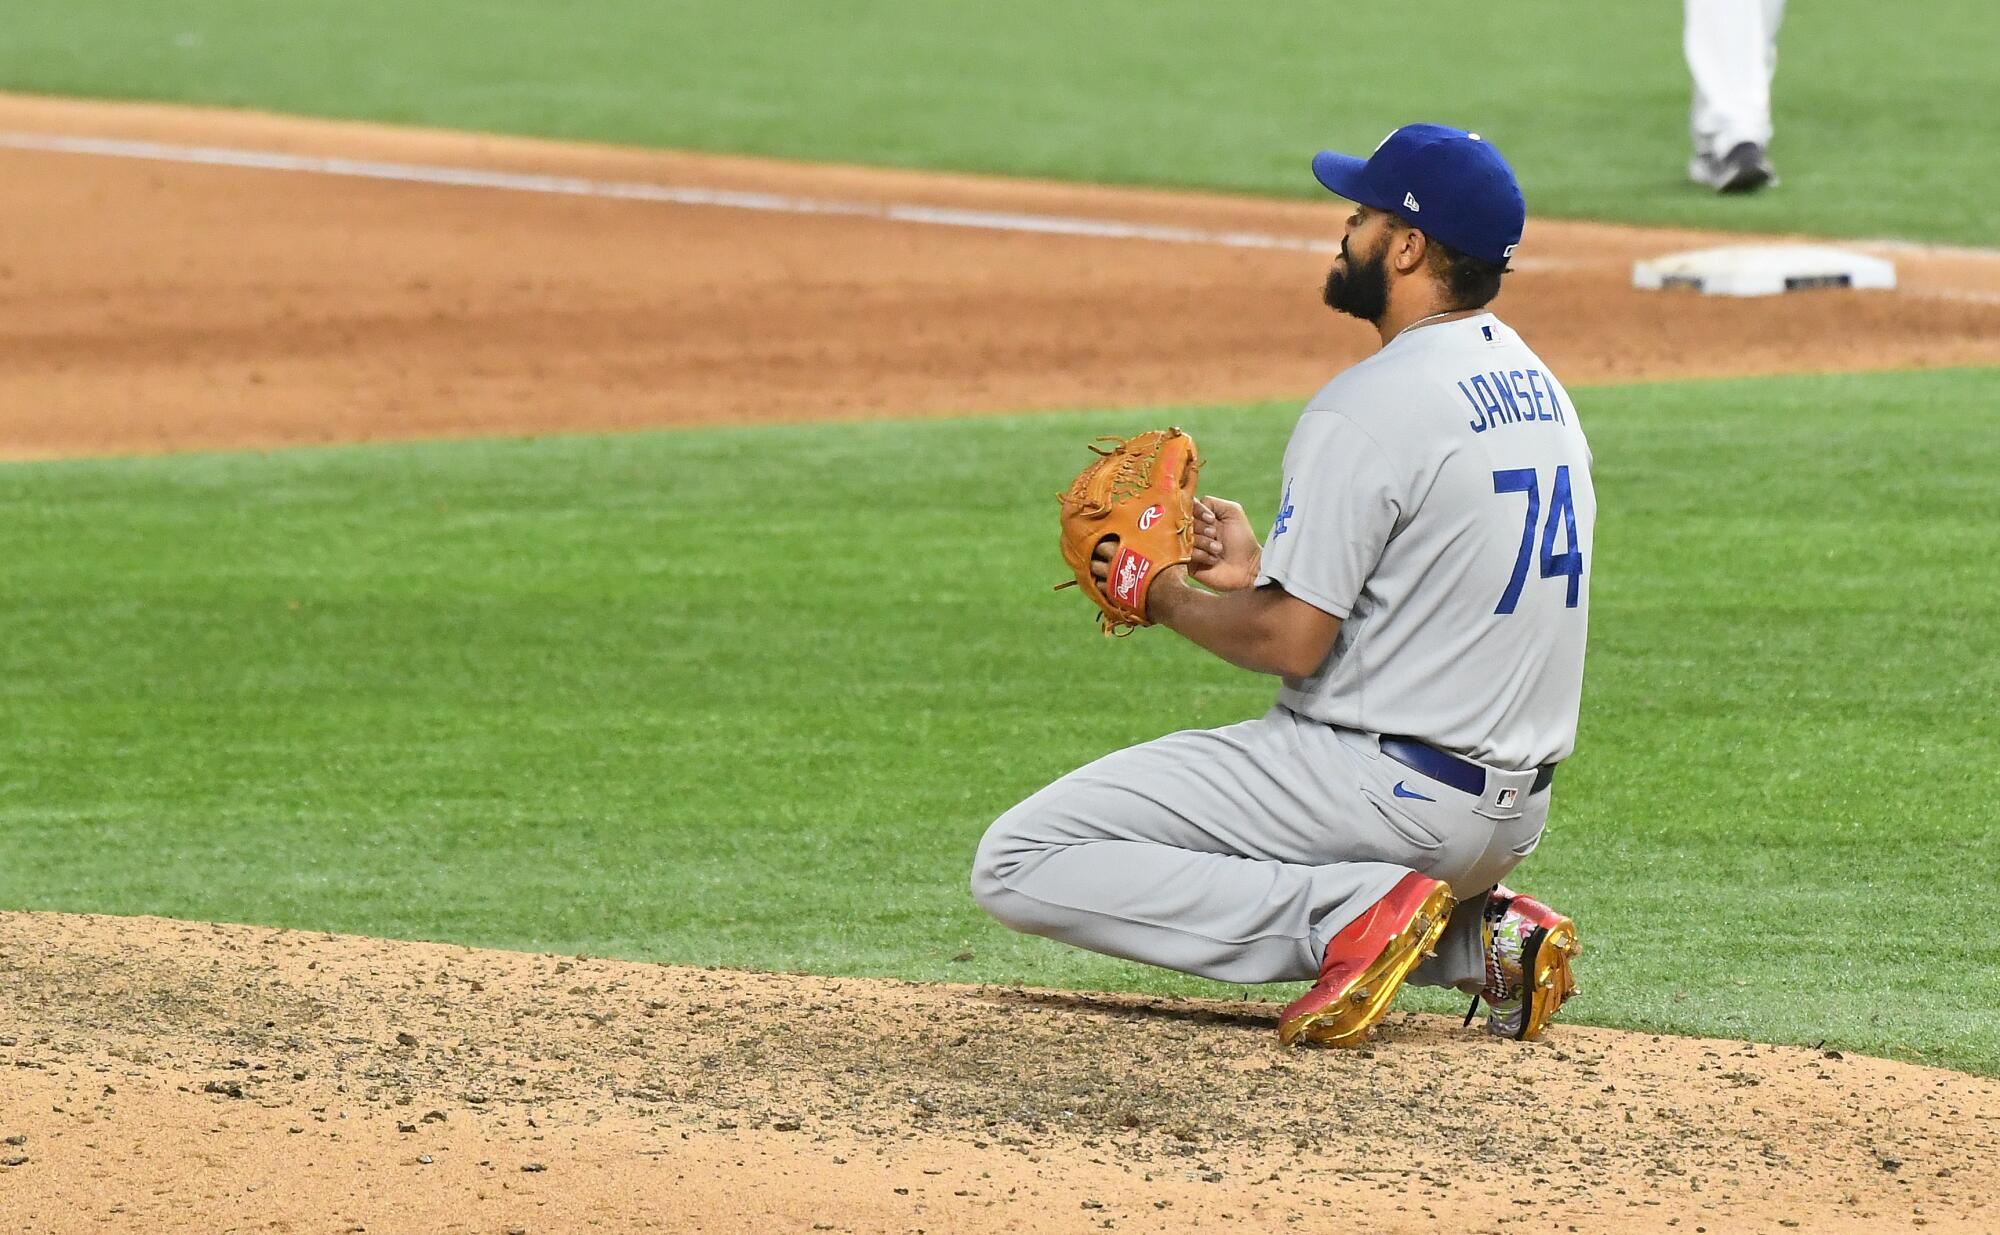 Dodgers reliever Kenley Jansen drops to his knees after giving up a single on the final play of Game 4 of the World Series.